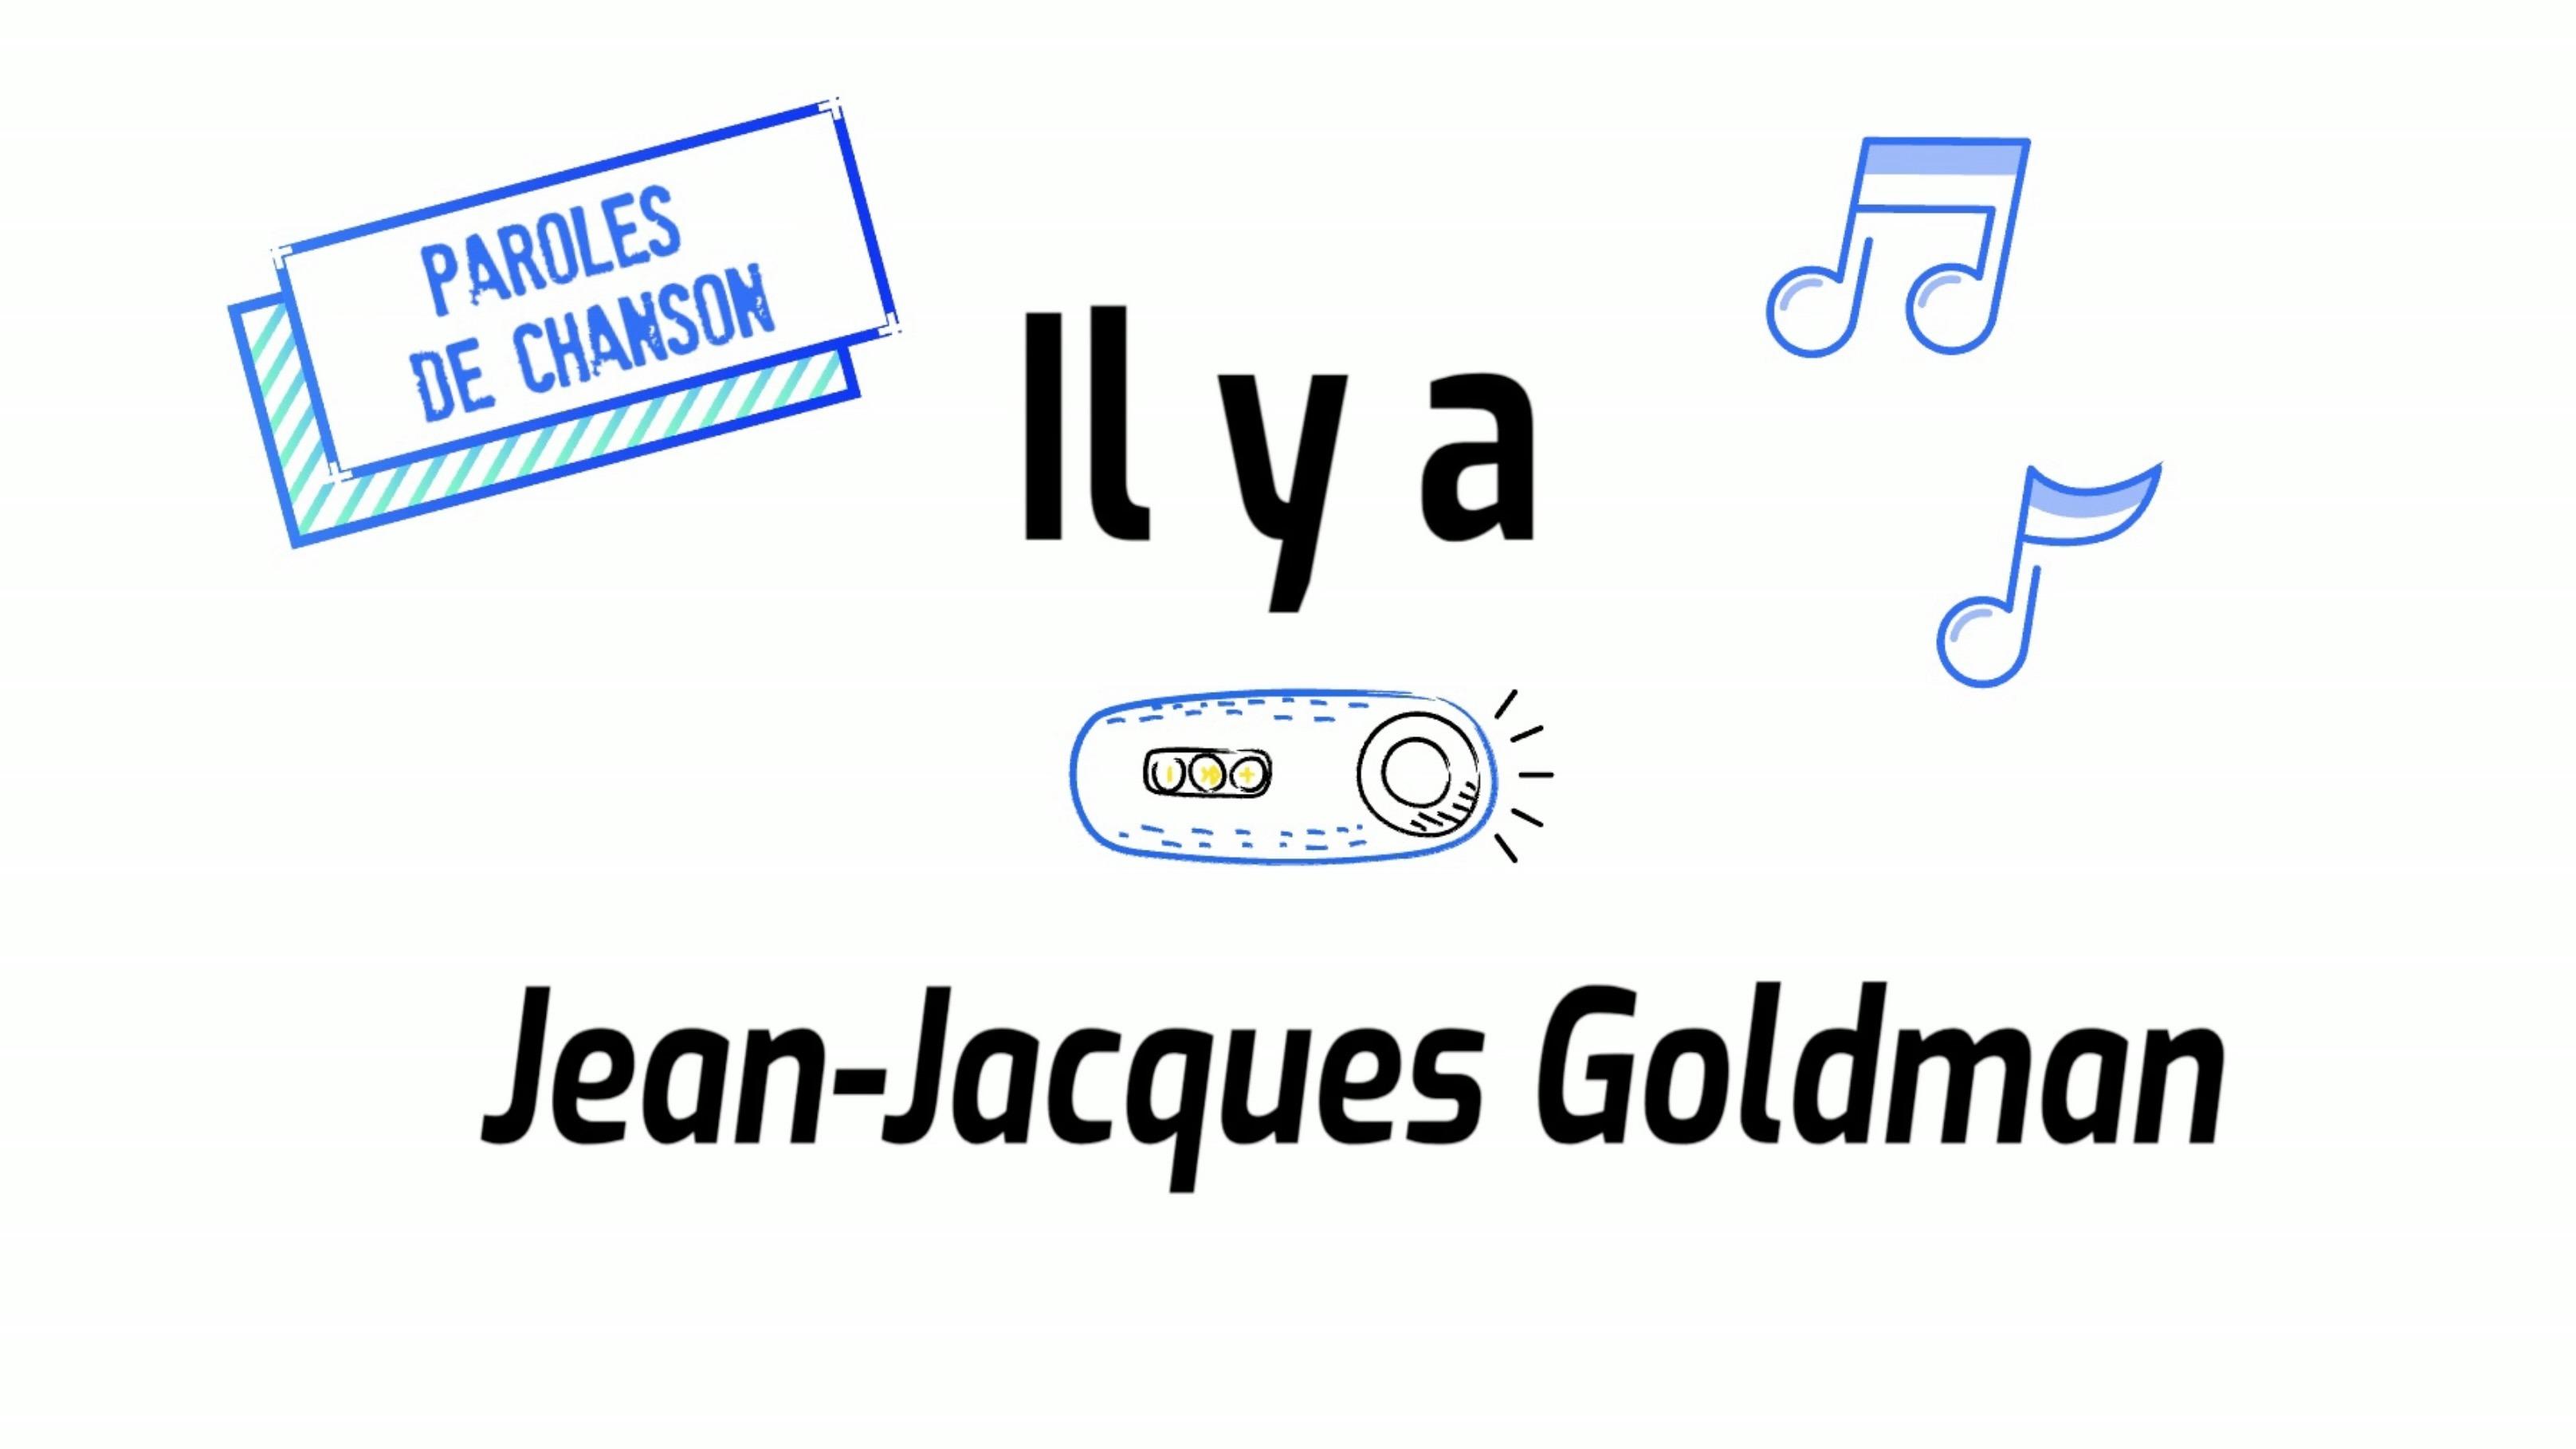 Improve Your French with Songs - "Il y a" (J.J. Goldman)